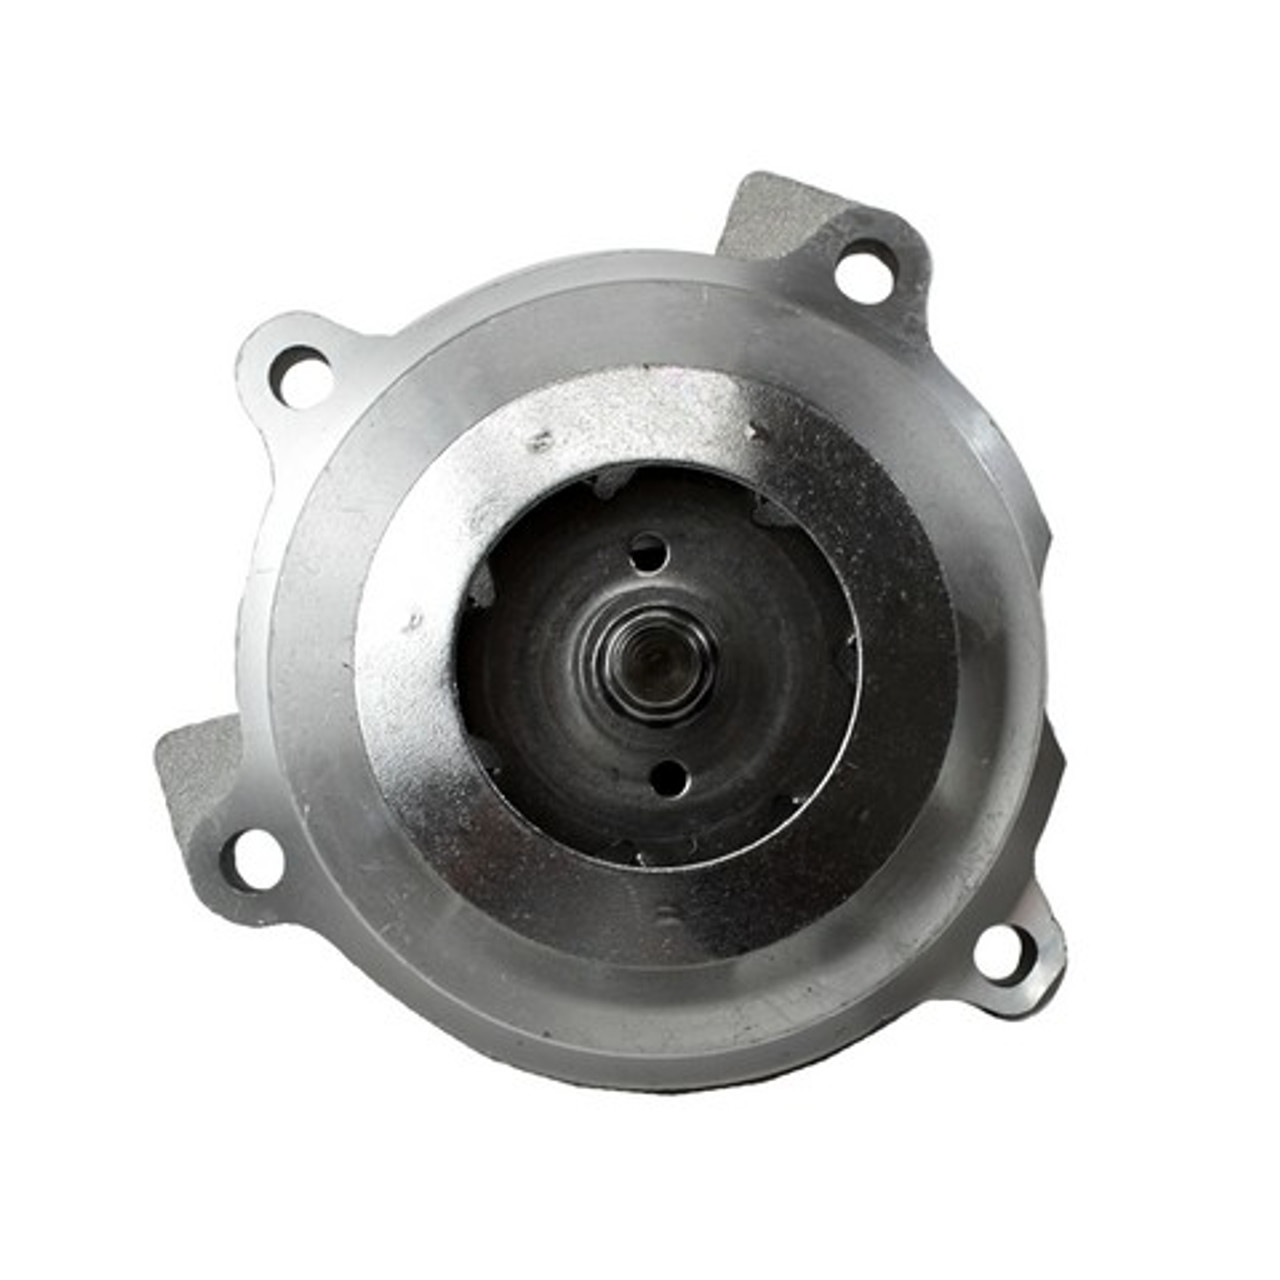 Water Pump 4.6L 2000 Lincoln Continental - WP4143.6